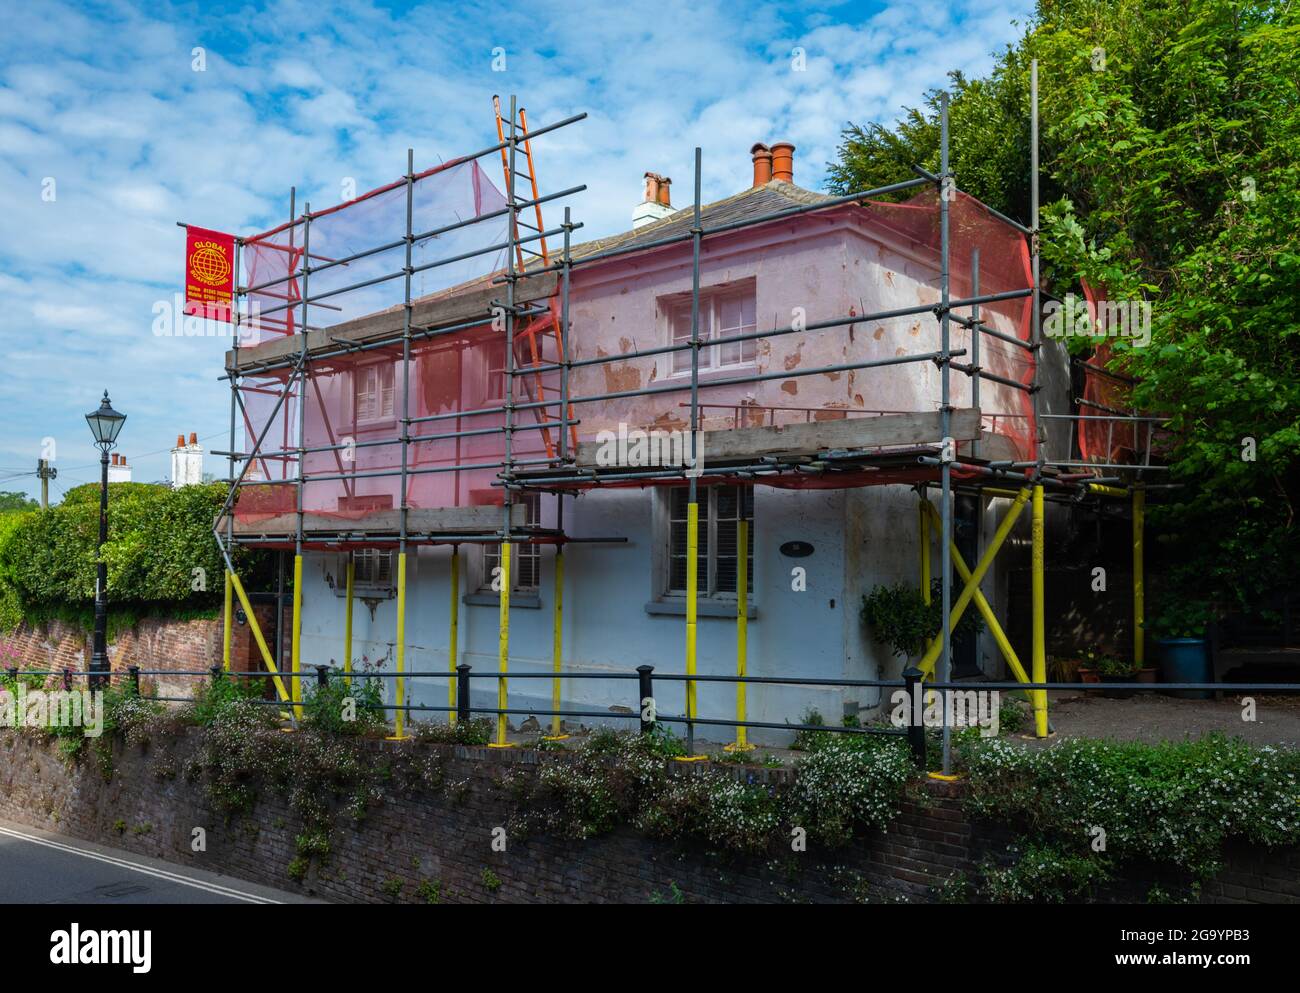 2 storey house in the UK covered in scaffolding while maintenance work is carried out. Stock Photo